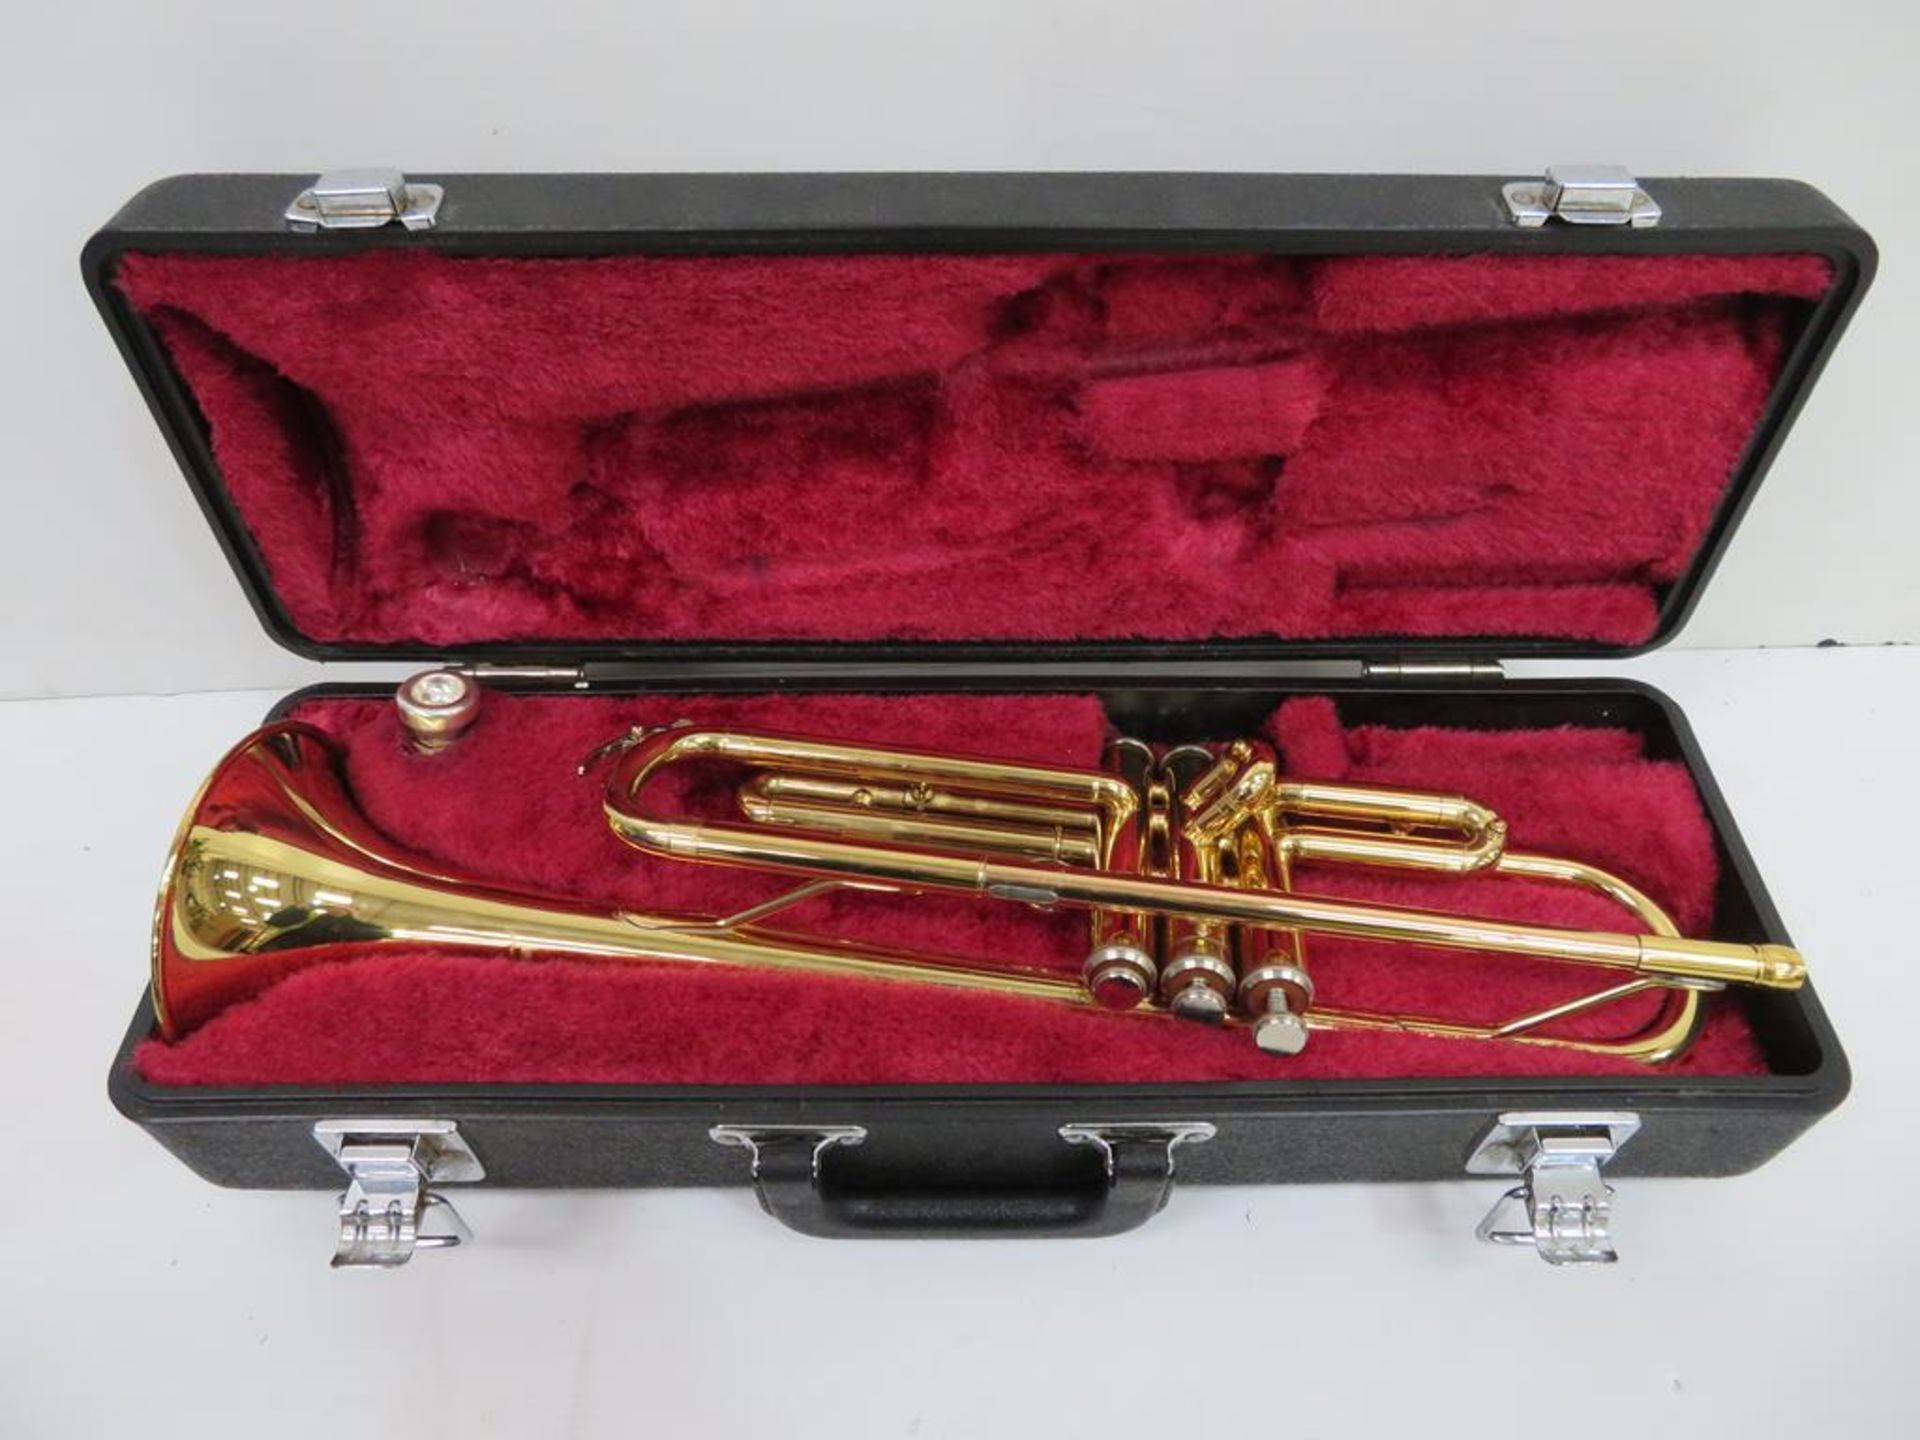 A Yamaha YTR1335 14186353 Trumpet with case